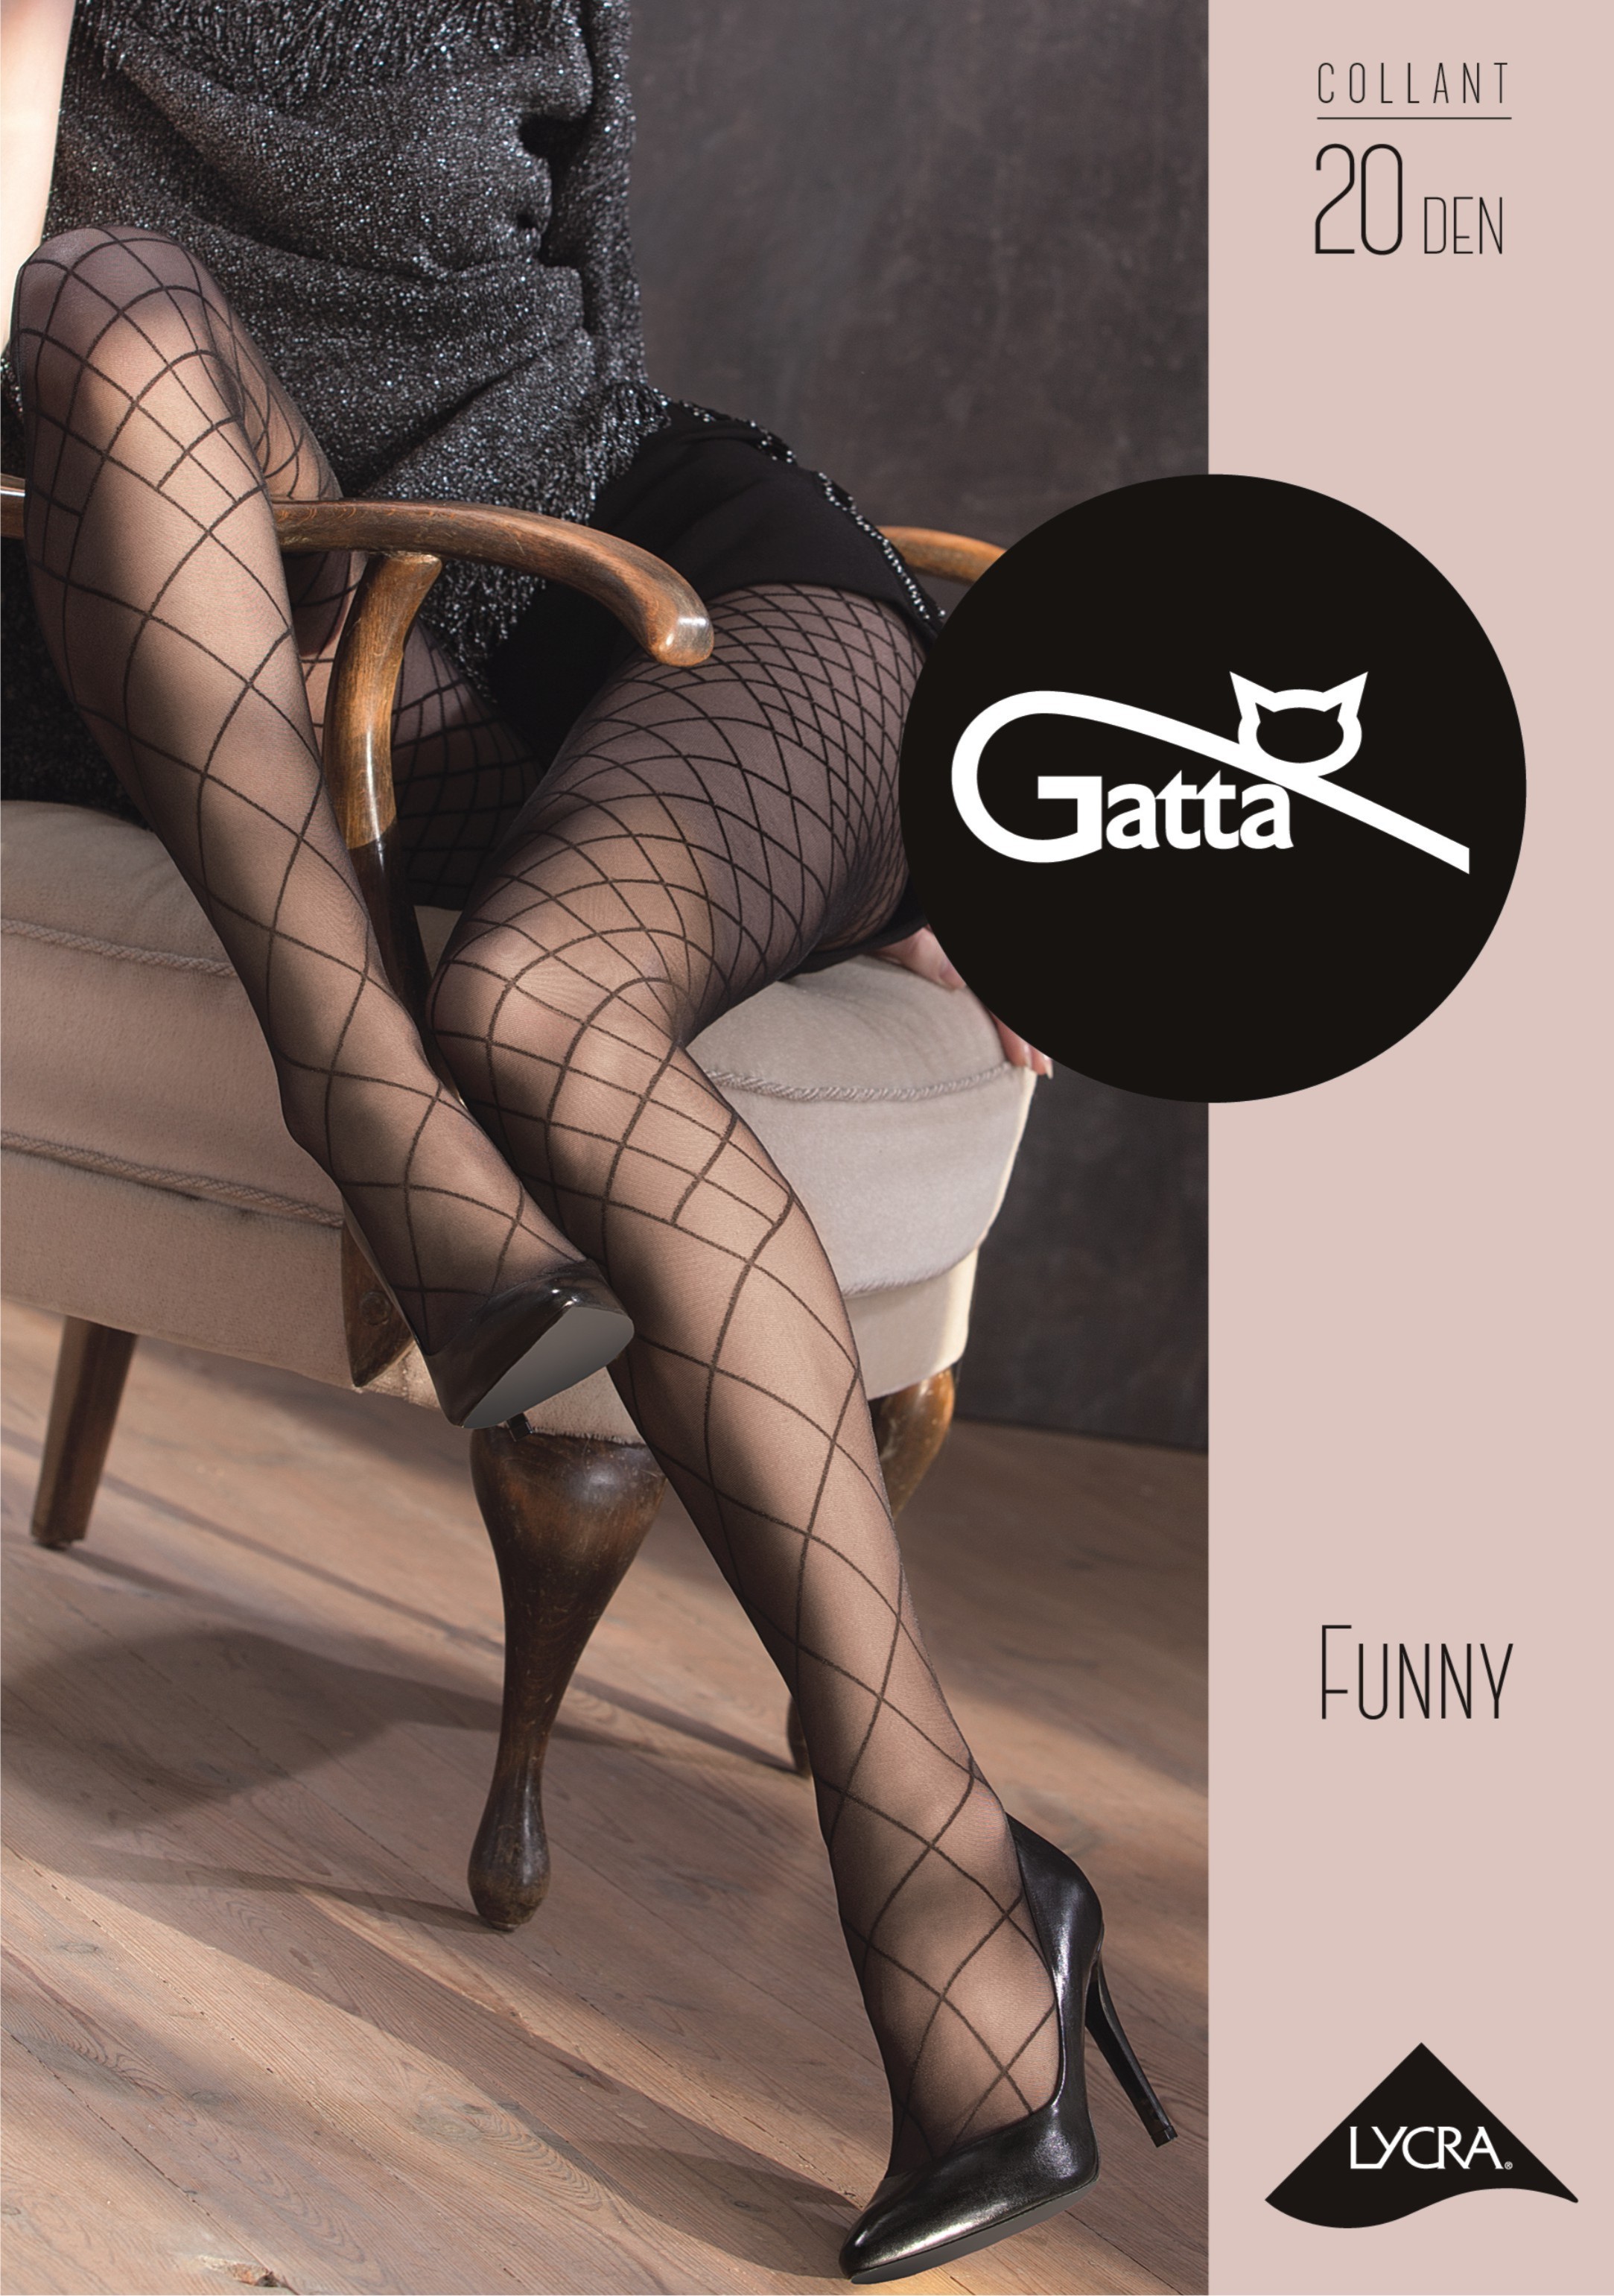  CALZITALY Sheer Fashion Patterned Tights for Women with Little  Hearts - Black Opaque Tights for Women 20 Denier - Sheer Black Tights for  Women in S/M, L/XL - Made in Italy 